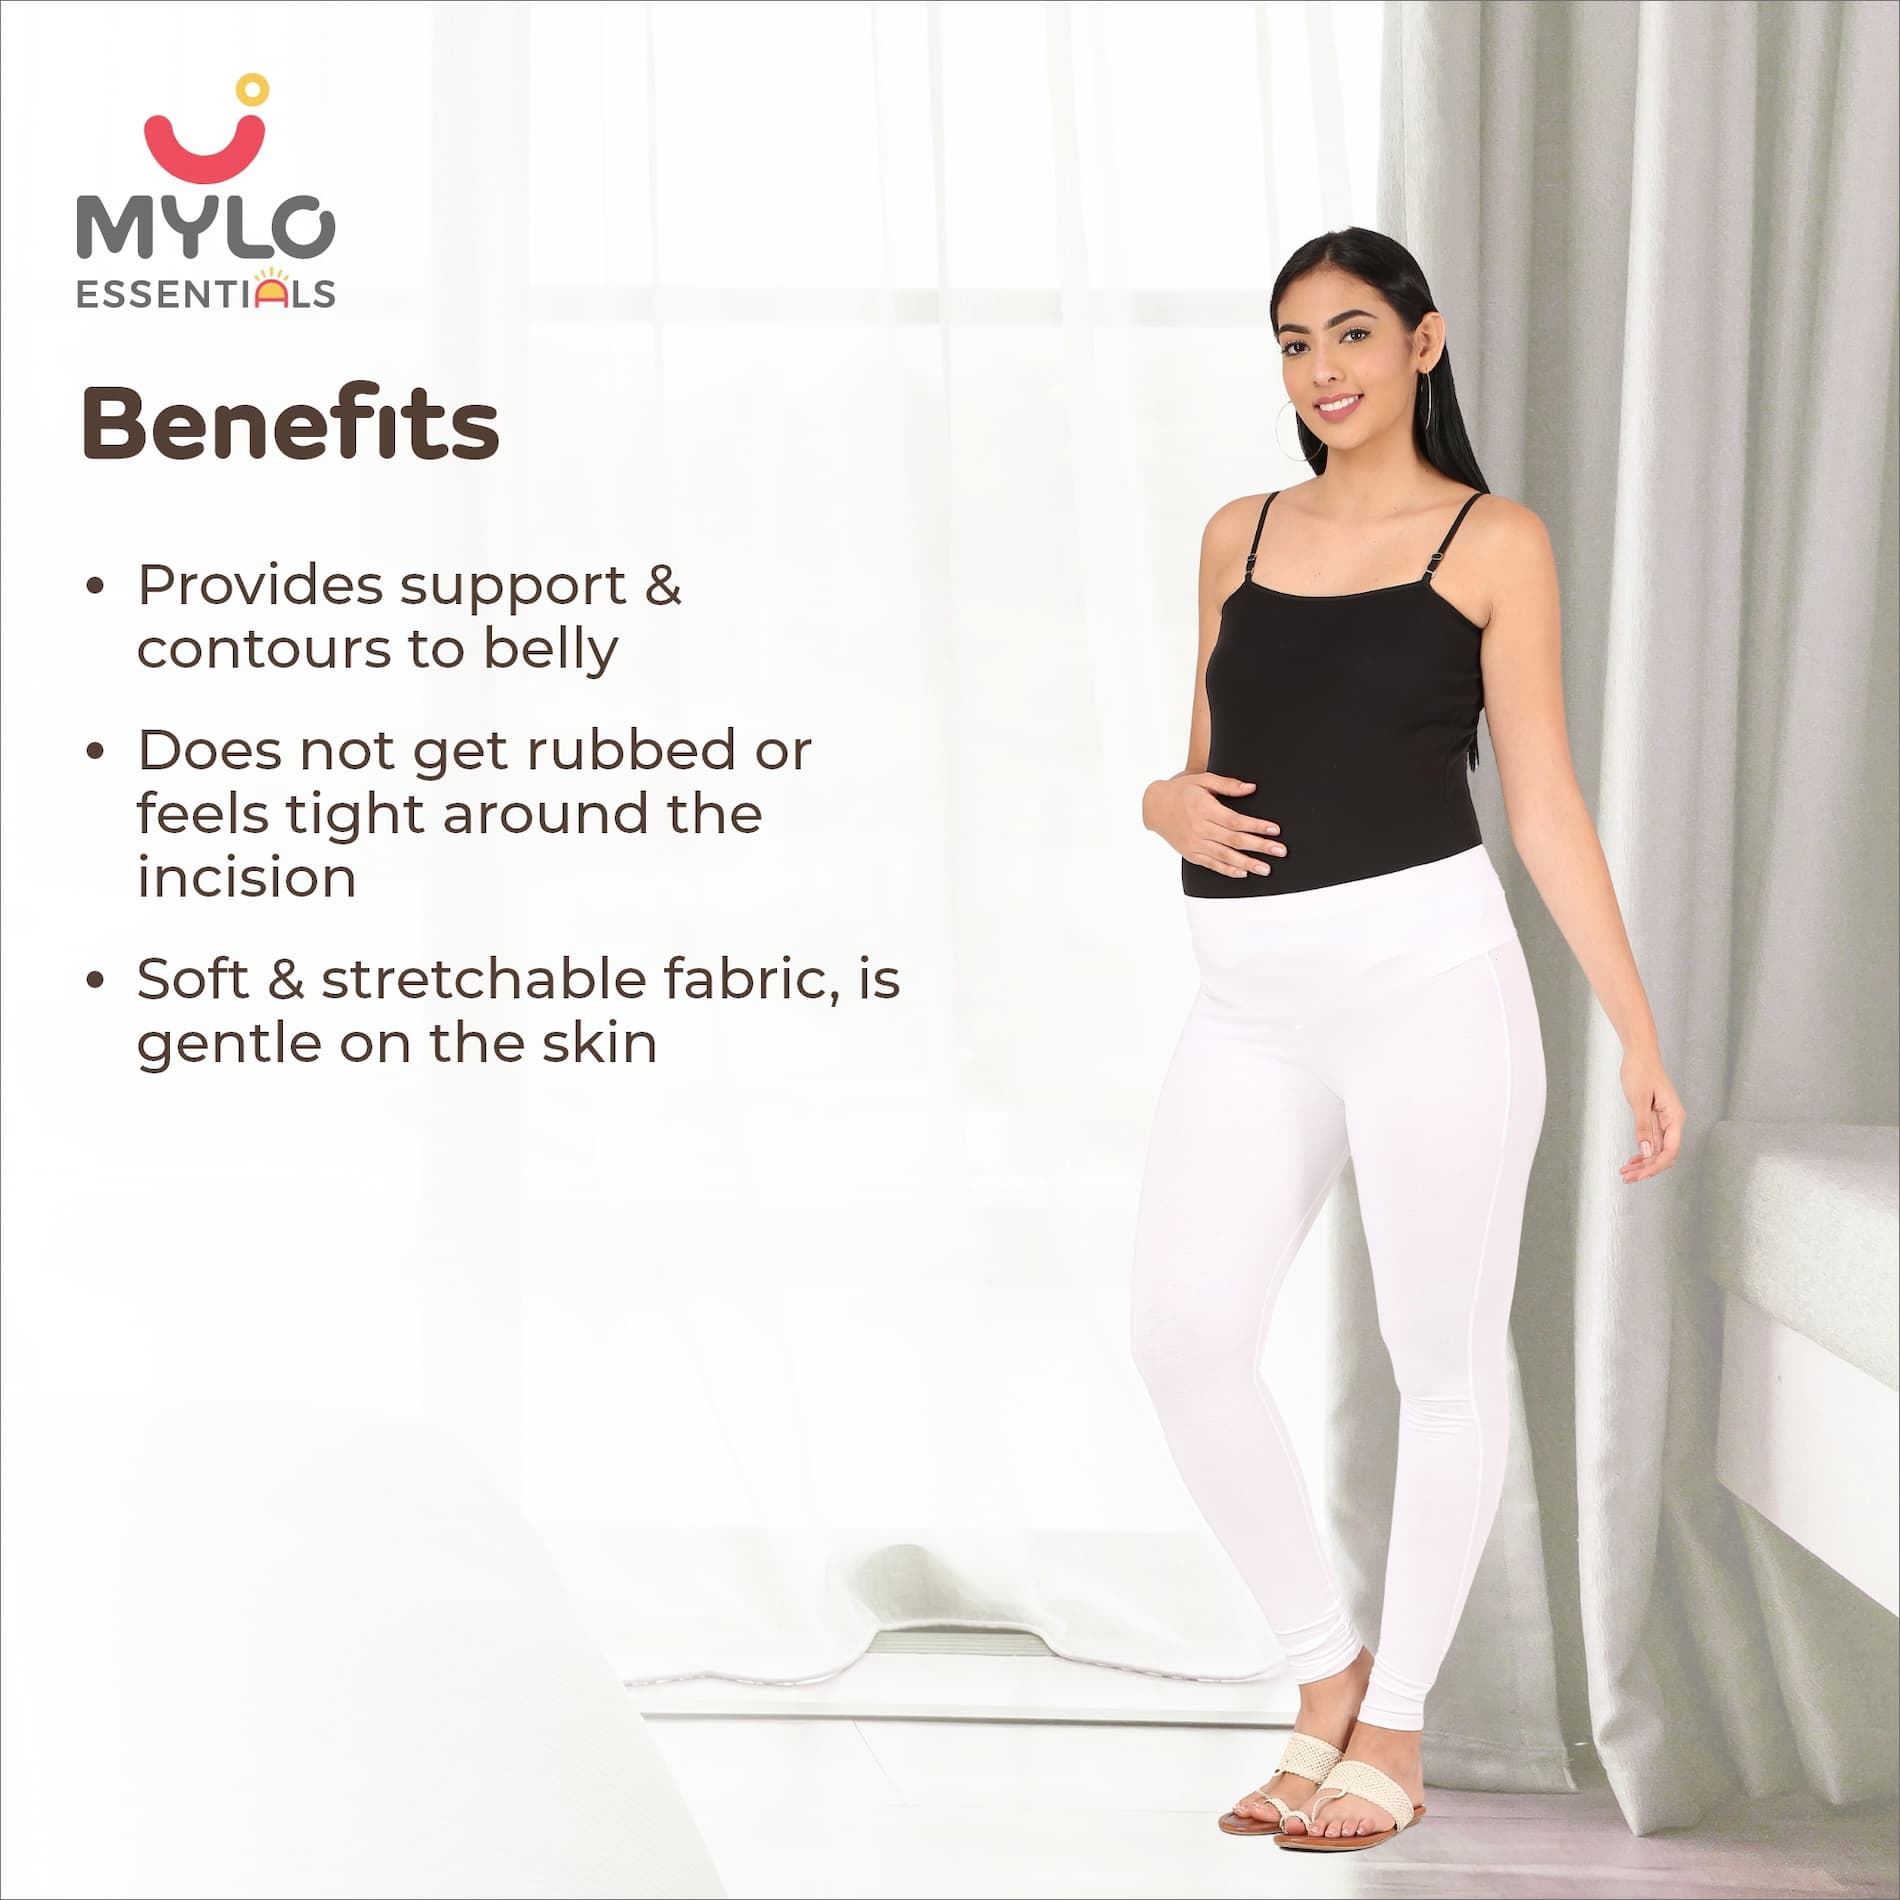 Stretchable Pregnancy & Post Delivery Leggings - White (XL)